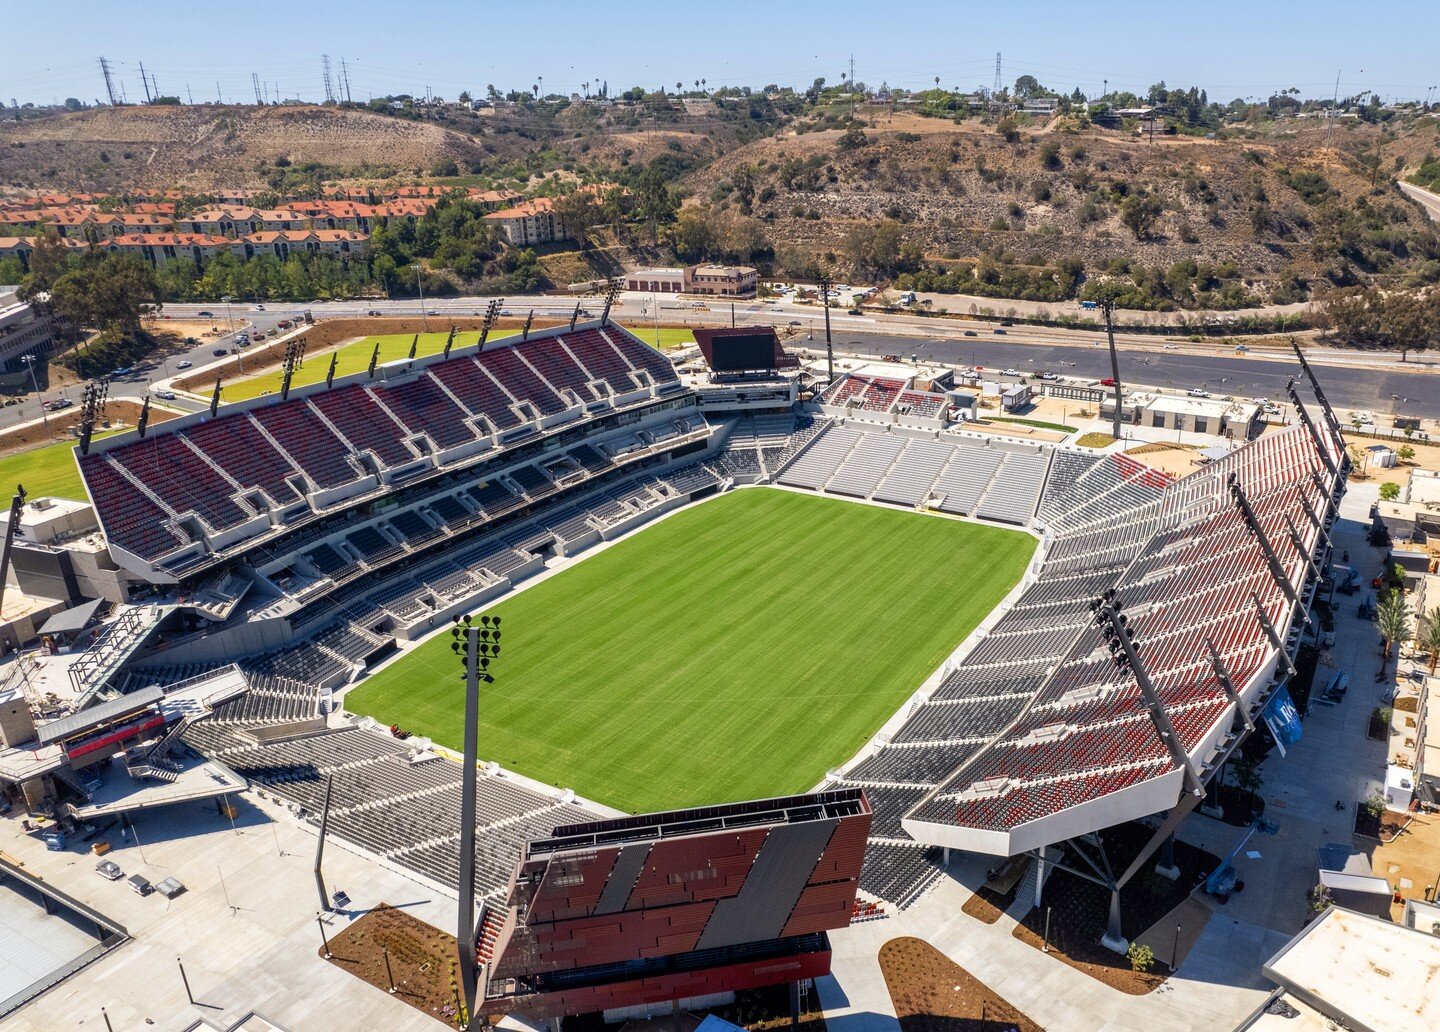 While it's not quite the World Cup/Superbowl stadium some had hoped for, I am pretty excited to see this part of Mission Valley updated. Who else is excited to catch a game or concert here?

#sandiego #snapdragonstadium